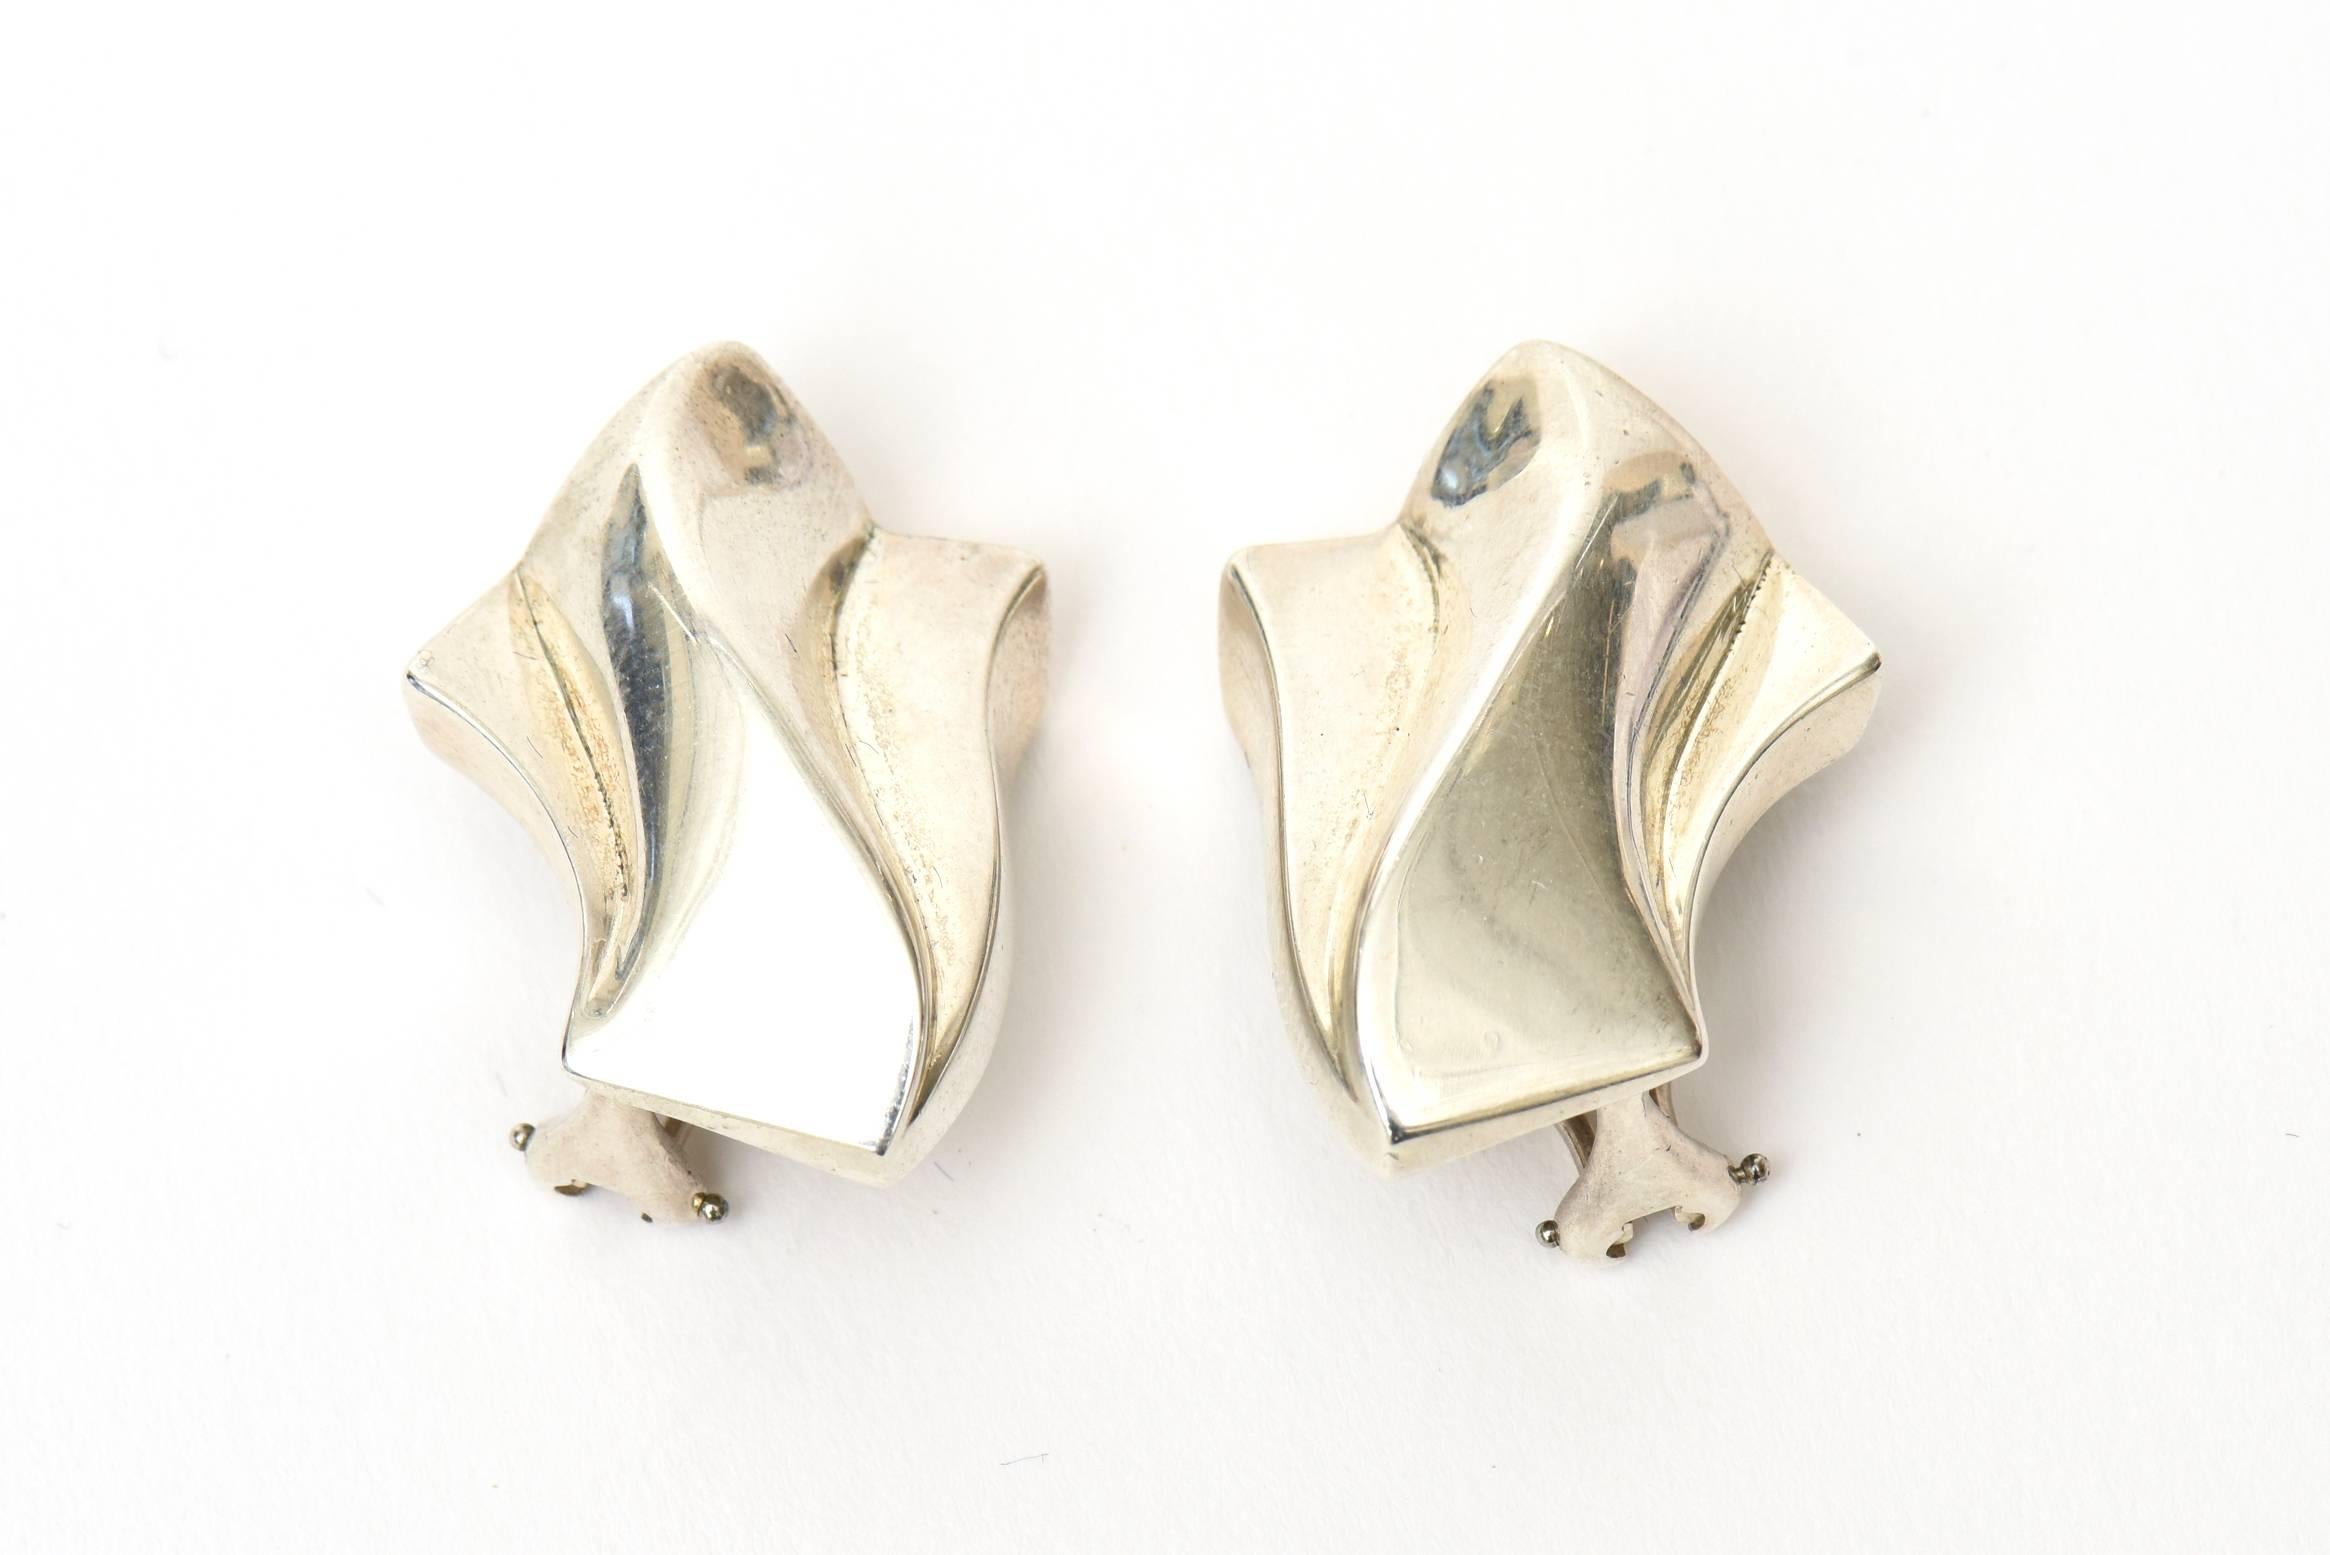 These sculptural pair of hallmarked Tiffany sterling silver clip on earrings are very versatile. They are hallmarked as follows: 1982 Tiffany and Co Sterling.
They are dated 1982. These can go day to evening and are always modernist and classic.